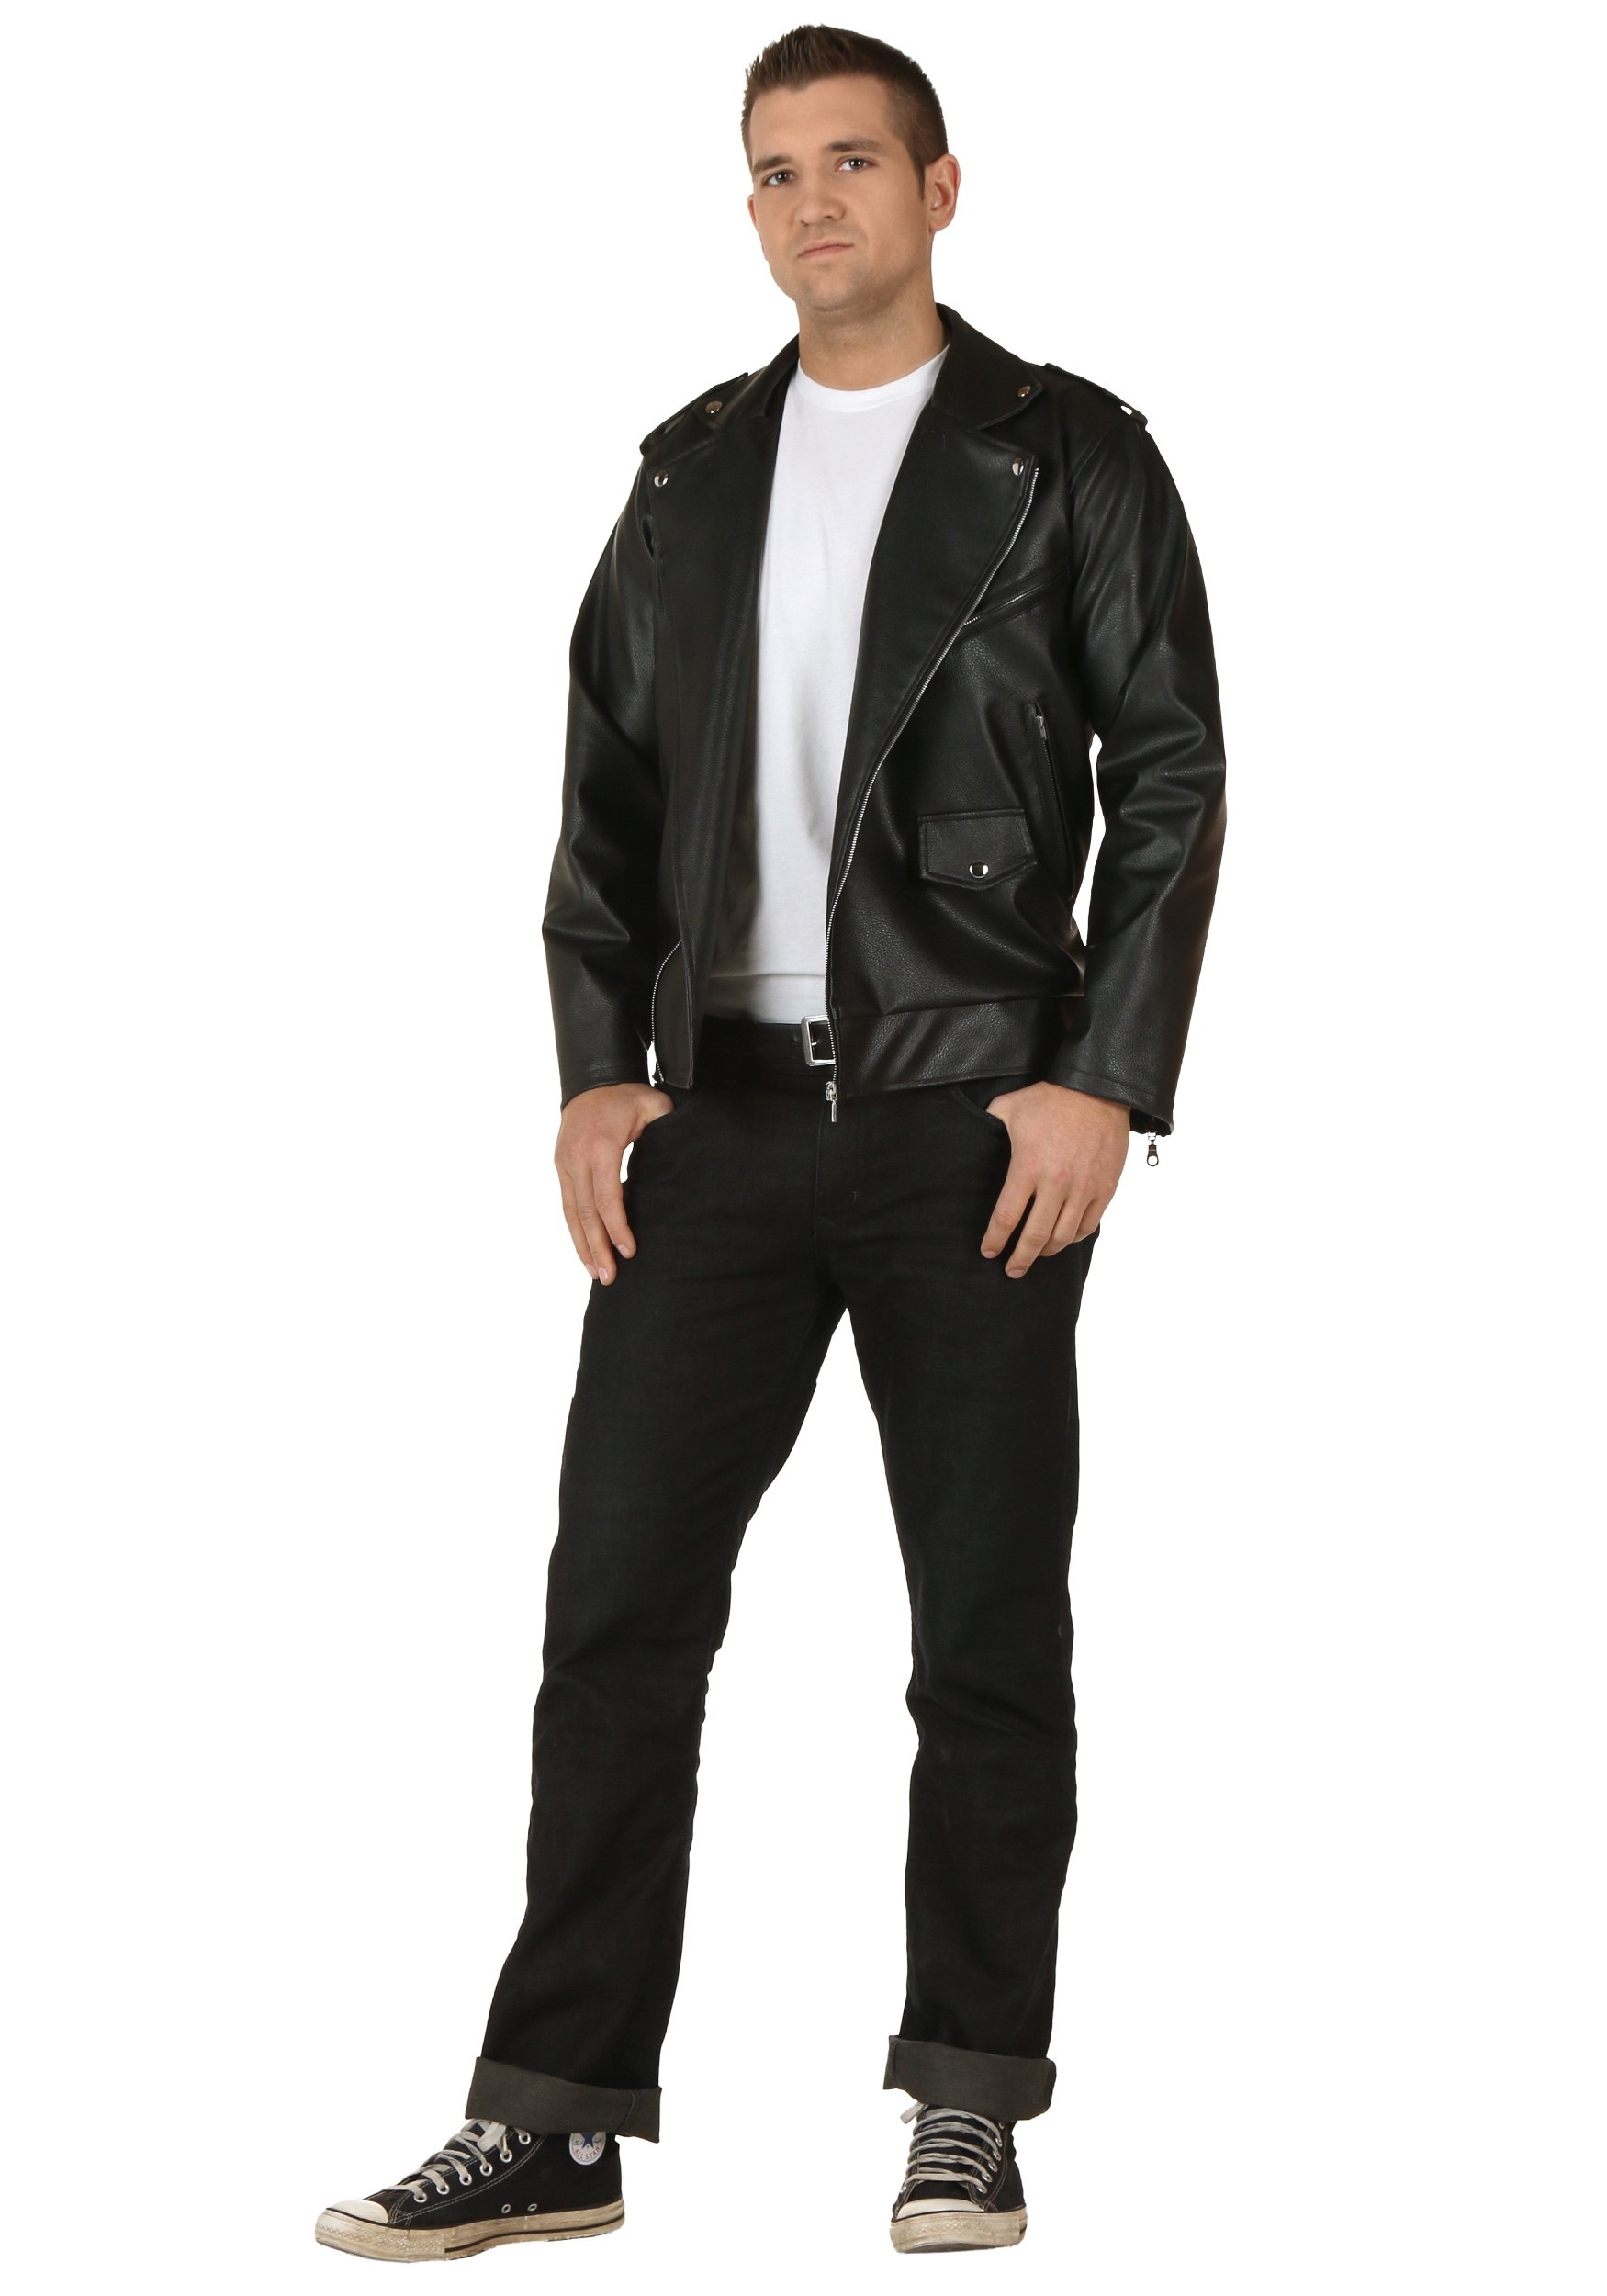 Photos - Fancy Dress FUN Costumes Adult Grease Authentic T-Birds Jacket Costume | Exclusive Bla